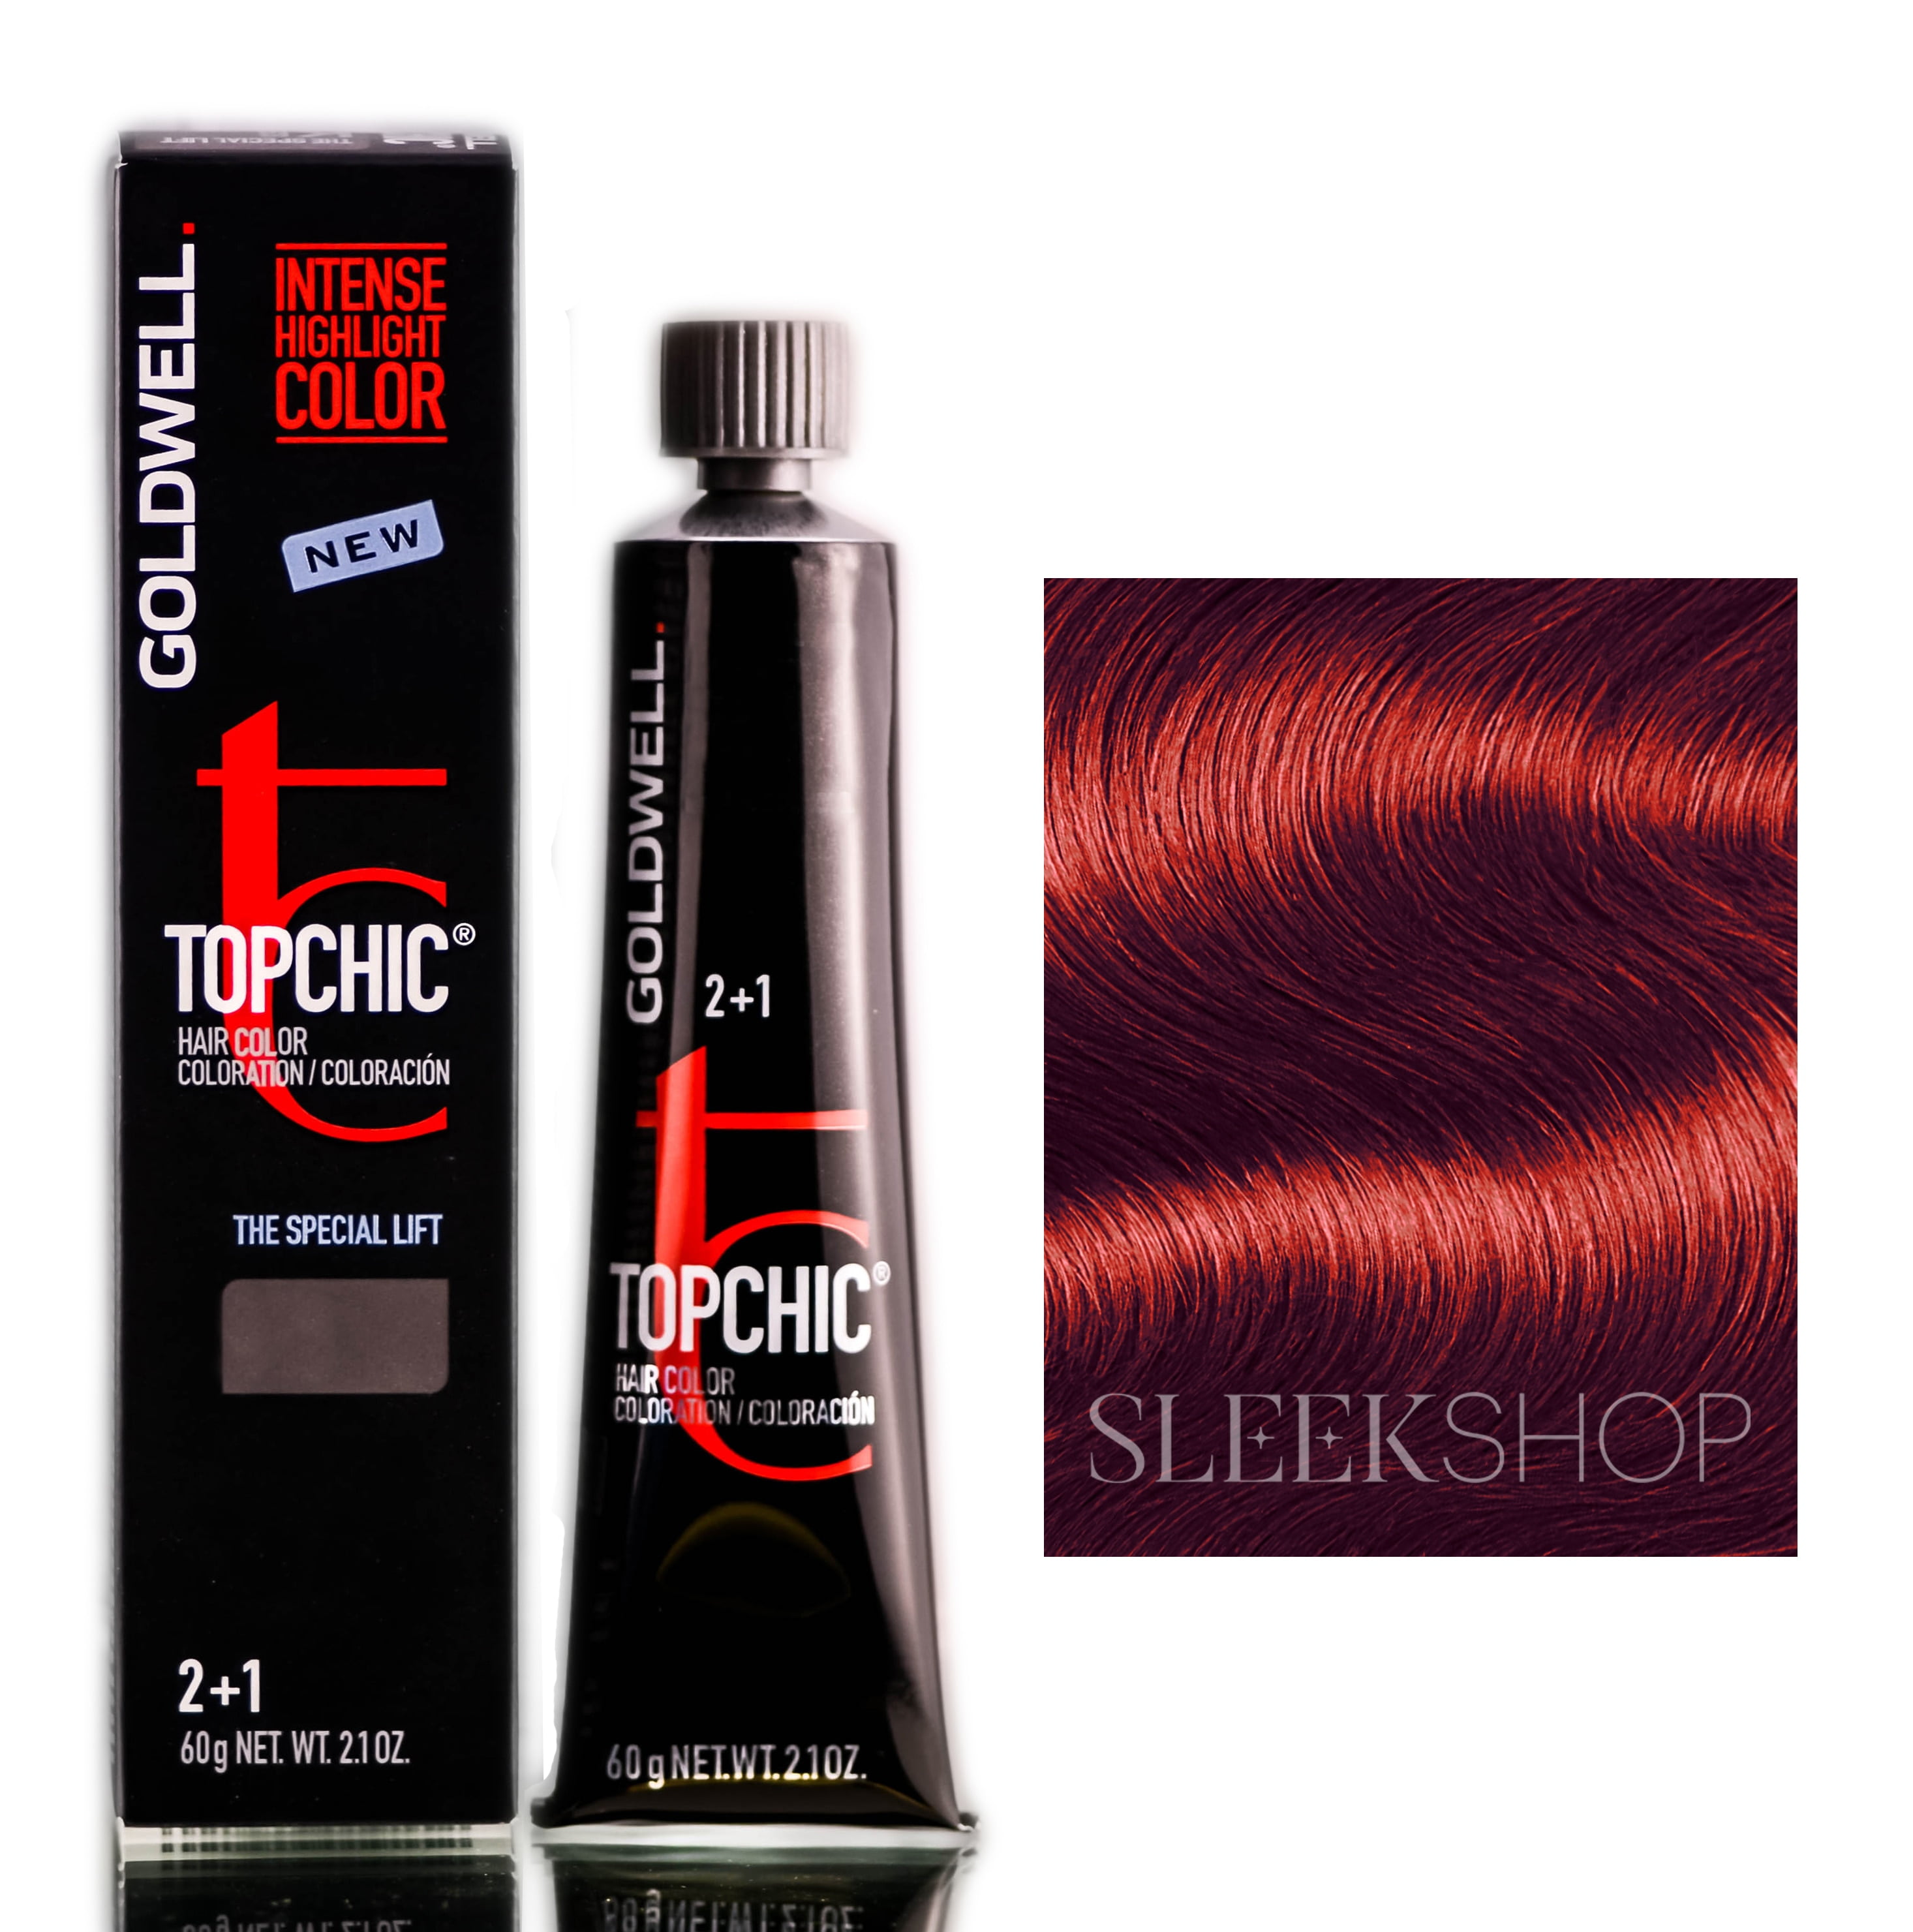 Marine skyskraber midlertidig KR - Copper Red , Goldwell Topchic Professional Hair Color (2.1 oz tube) -  The Special Lift, haircolor dye scalp beauty - Pack of 1 w/ Sleek 3-in-1  Comb/Brush - Walmart.com